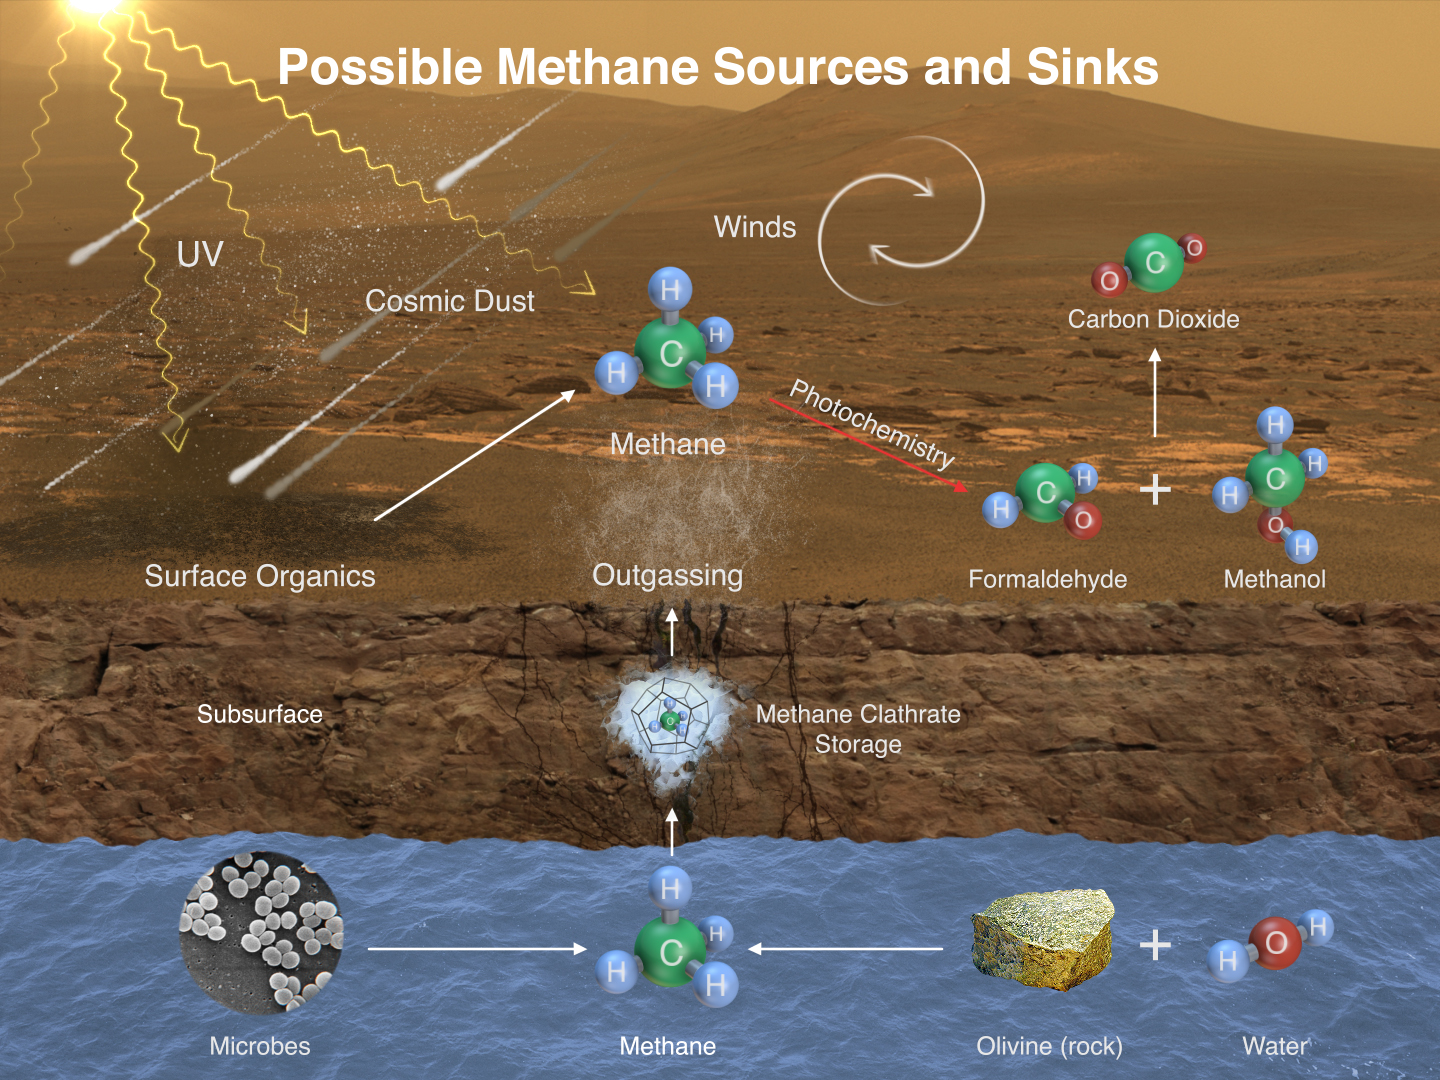 This image illustrates possible ways methane might be added to Mars' atmosphere (sources) and removed from the atmosphere (sinks). NASA's Curiosity Mars rover has detected fluctuations in methane concentration in the atmosphere, implying both types of activity occur on modern Mars.  Credit:  NASA/JPL-Caltech/SAM-GSFC/Univ. of Michigan 